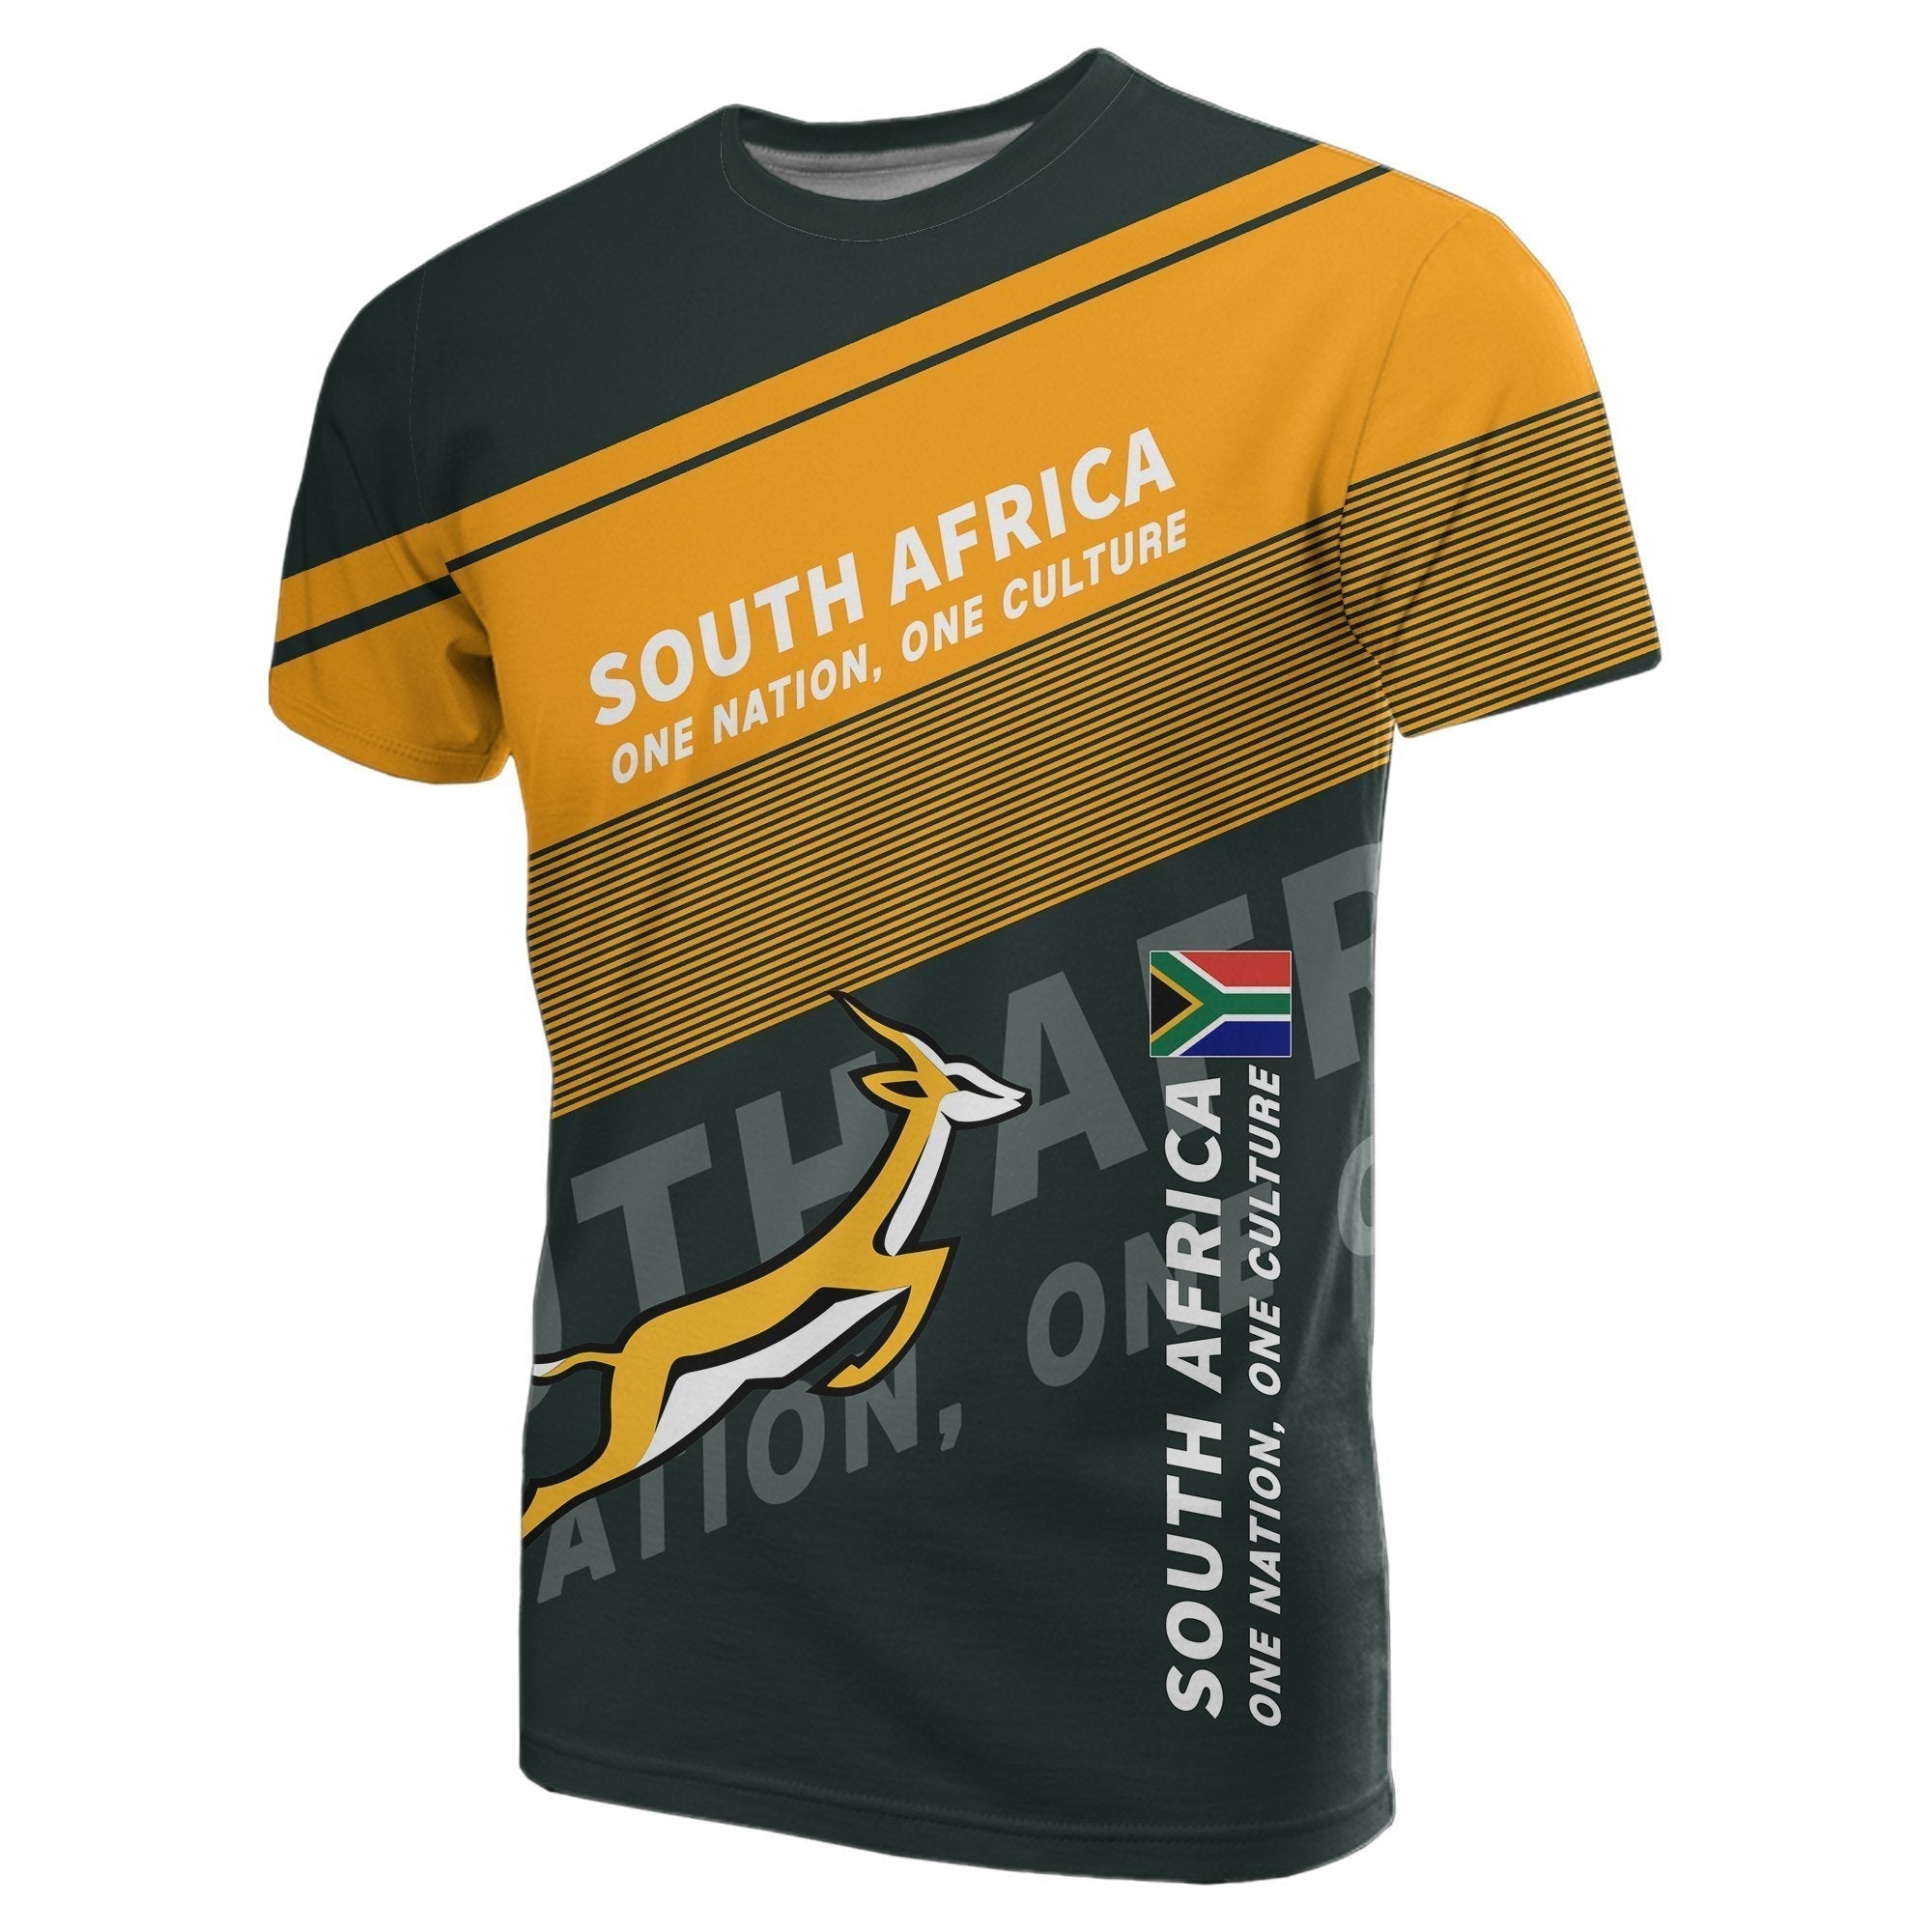 wonder-print-shop-t-shirt-south-africa-tee-flag-motto-limited-style